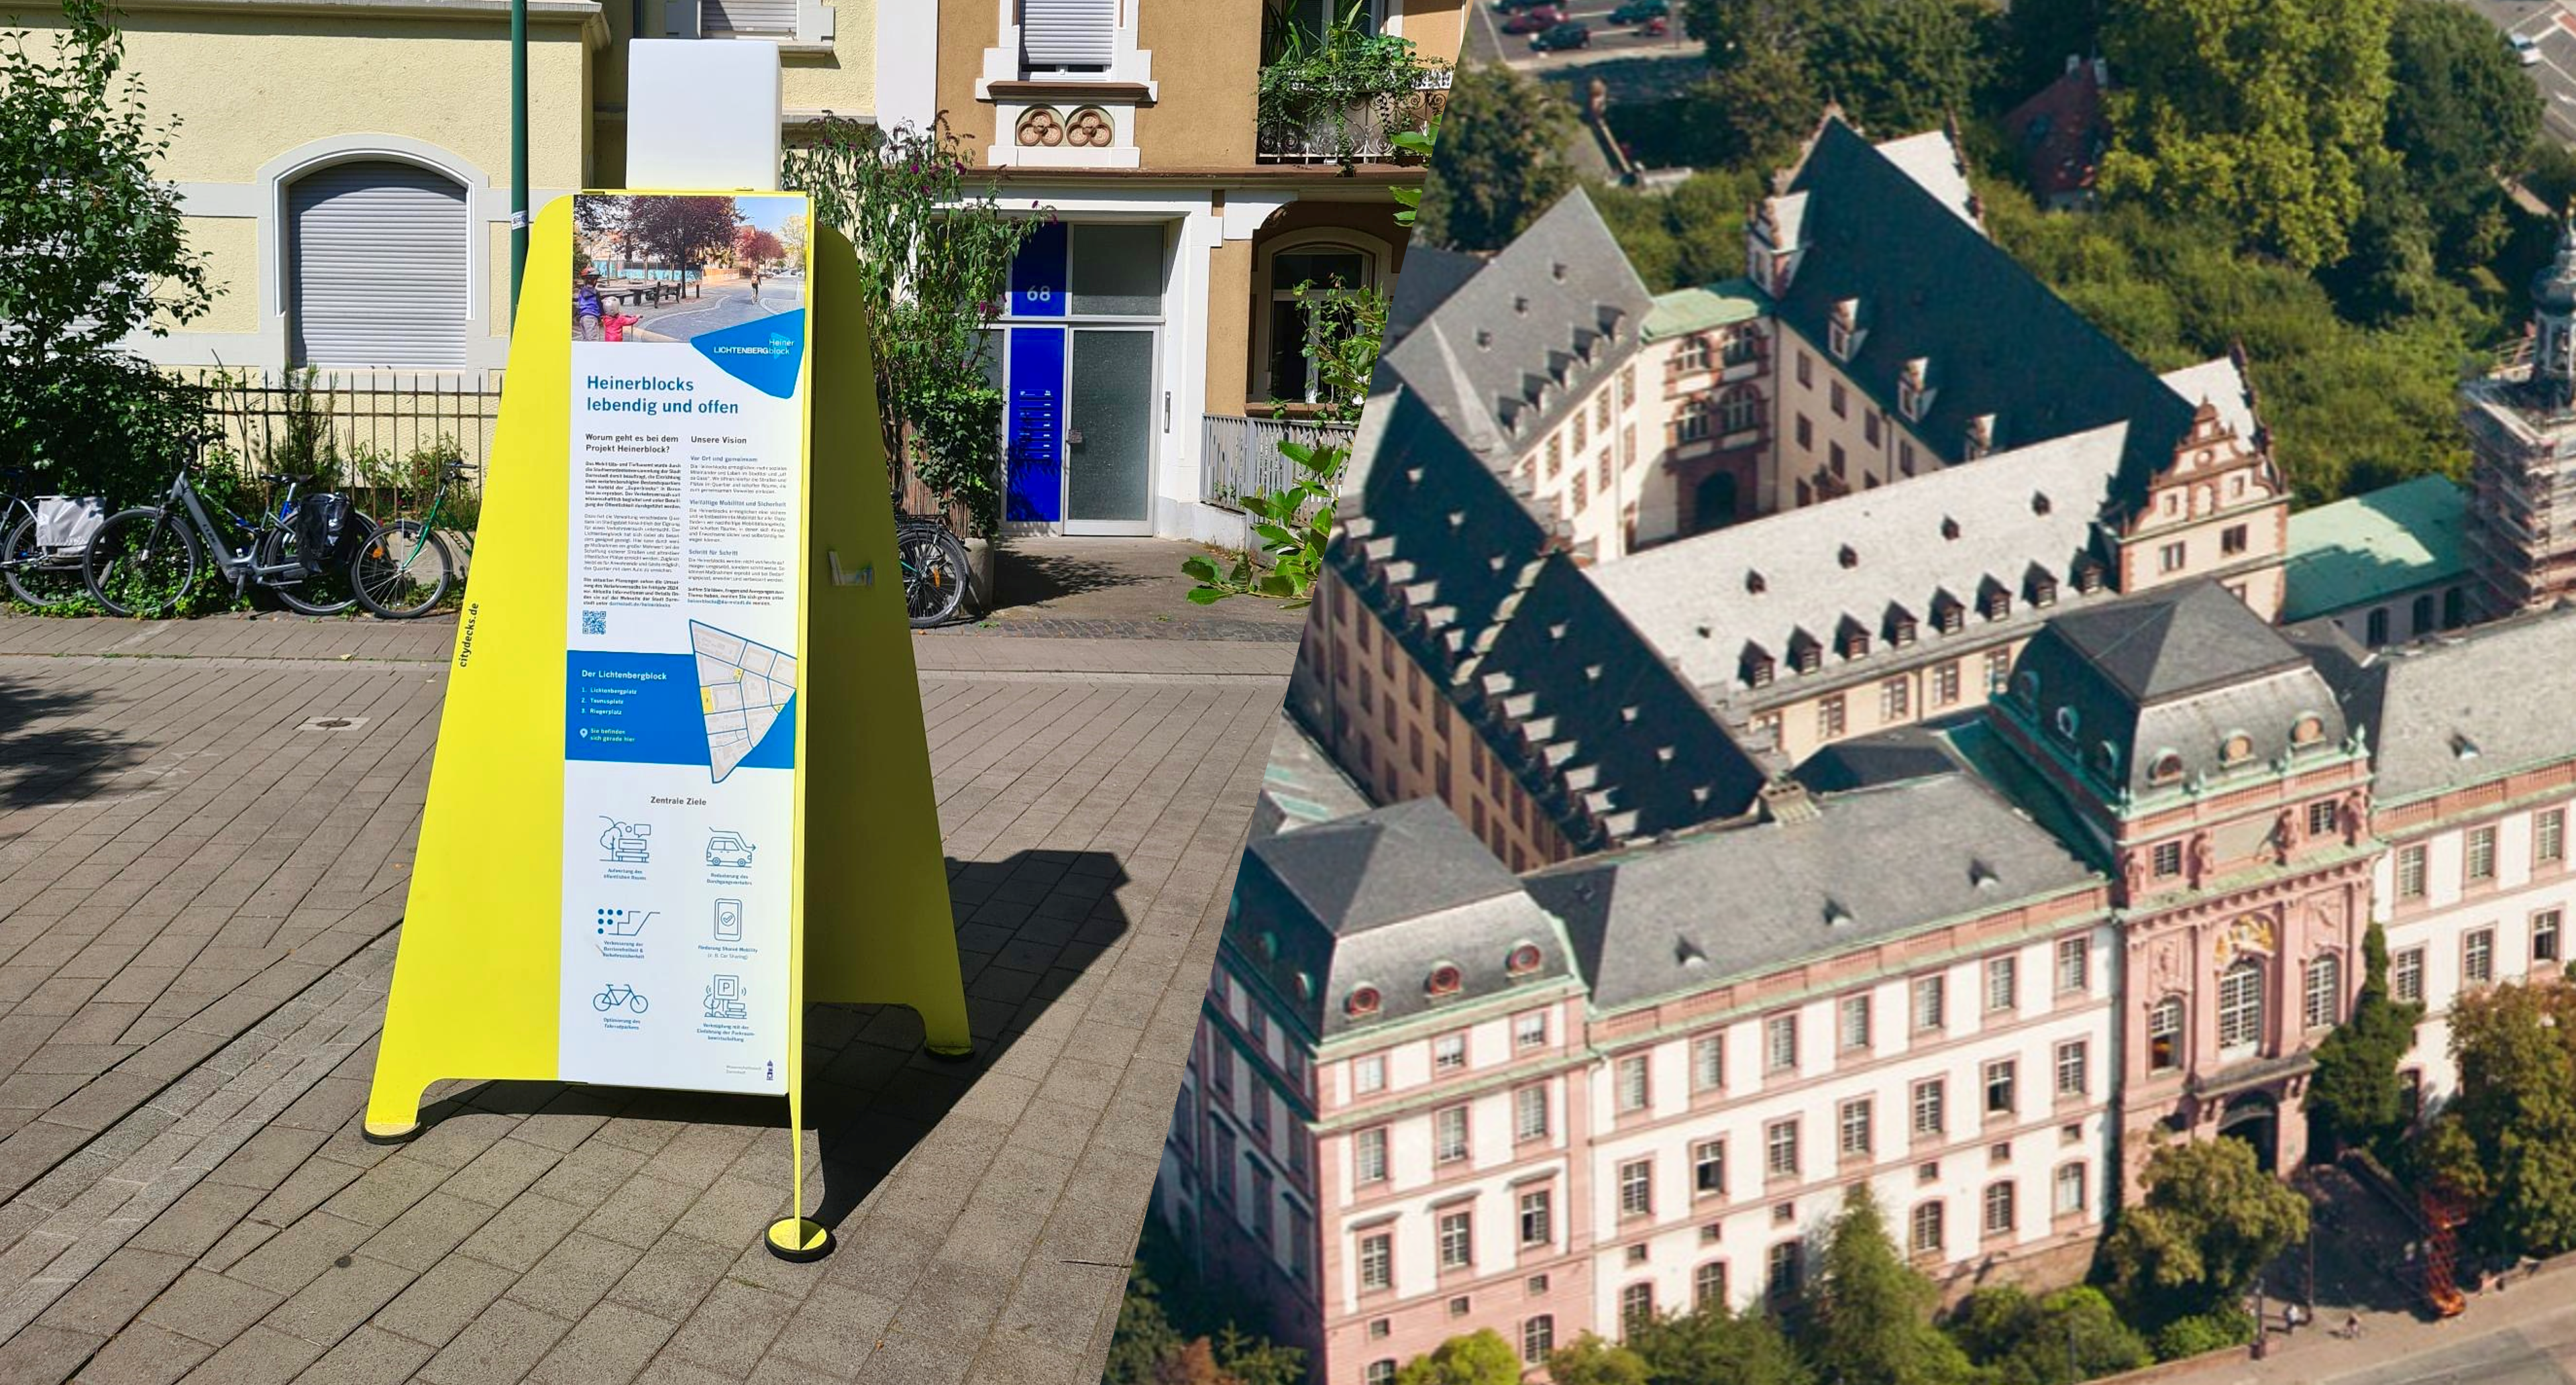 emergenCITY at European Mobility Week and Castle Opening in Darmstadt